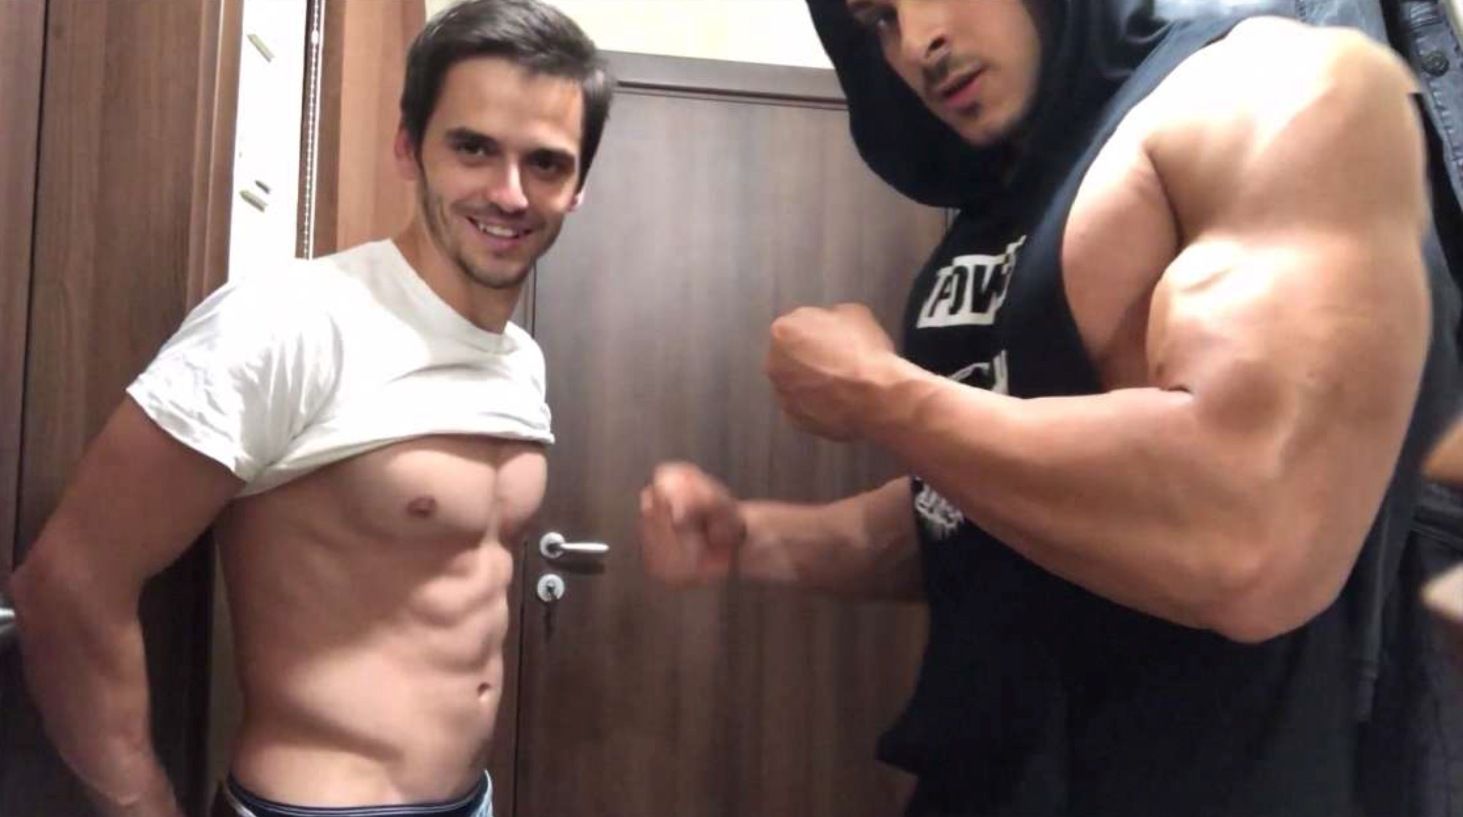 Teen Muscle God Dominates Next To Regular Muscle Guy.